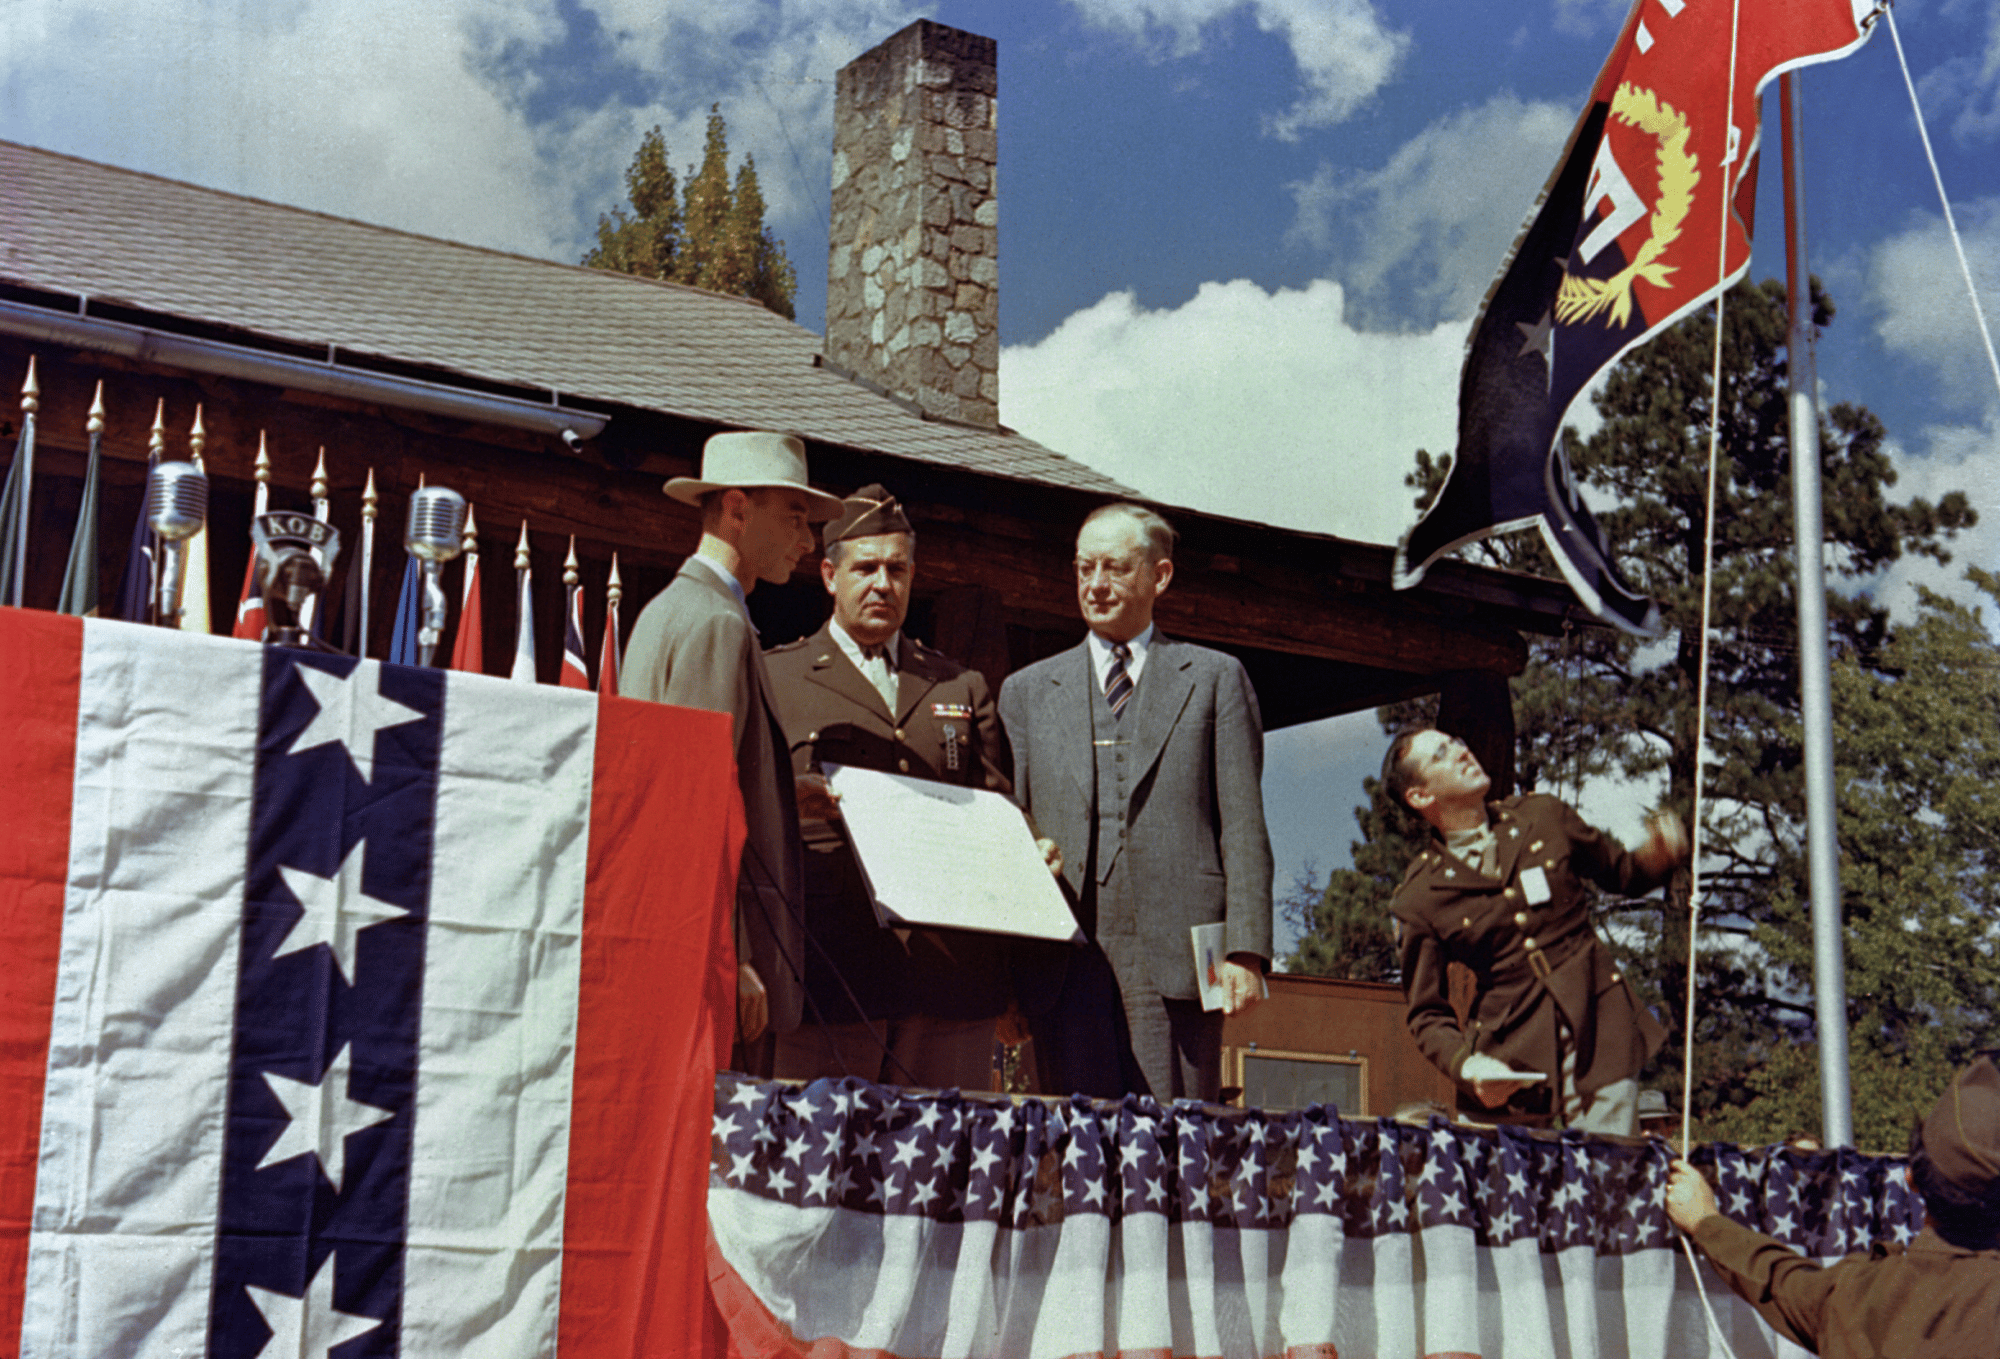 Los Alamos ranch house,16 October 1945. Robert Oppenheimer (left), Leslie Groves (center) and Robert Sproul (right) at the ceremony to present the Los Alamos Laboratory with the Army-Navy E Award